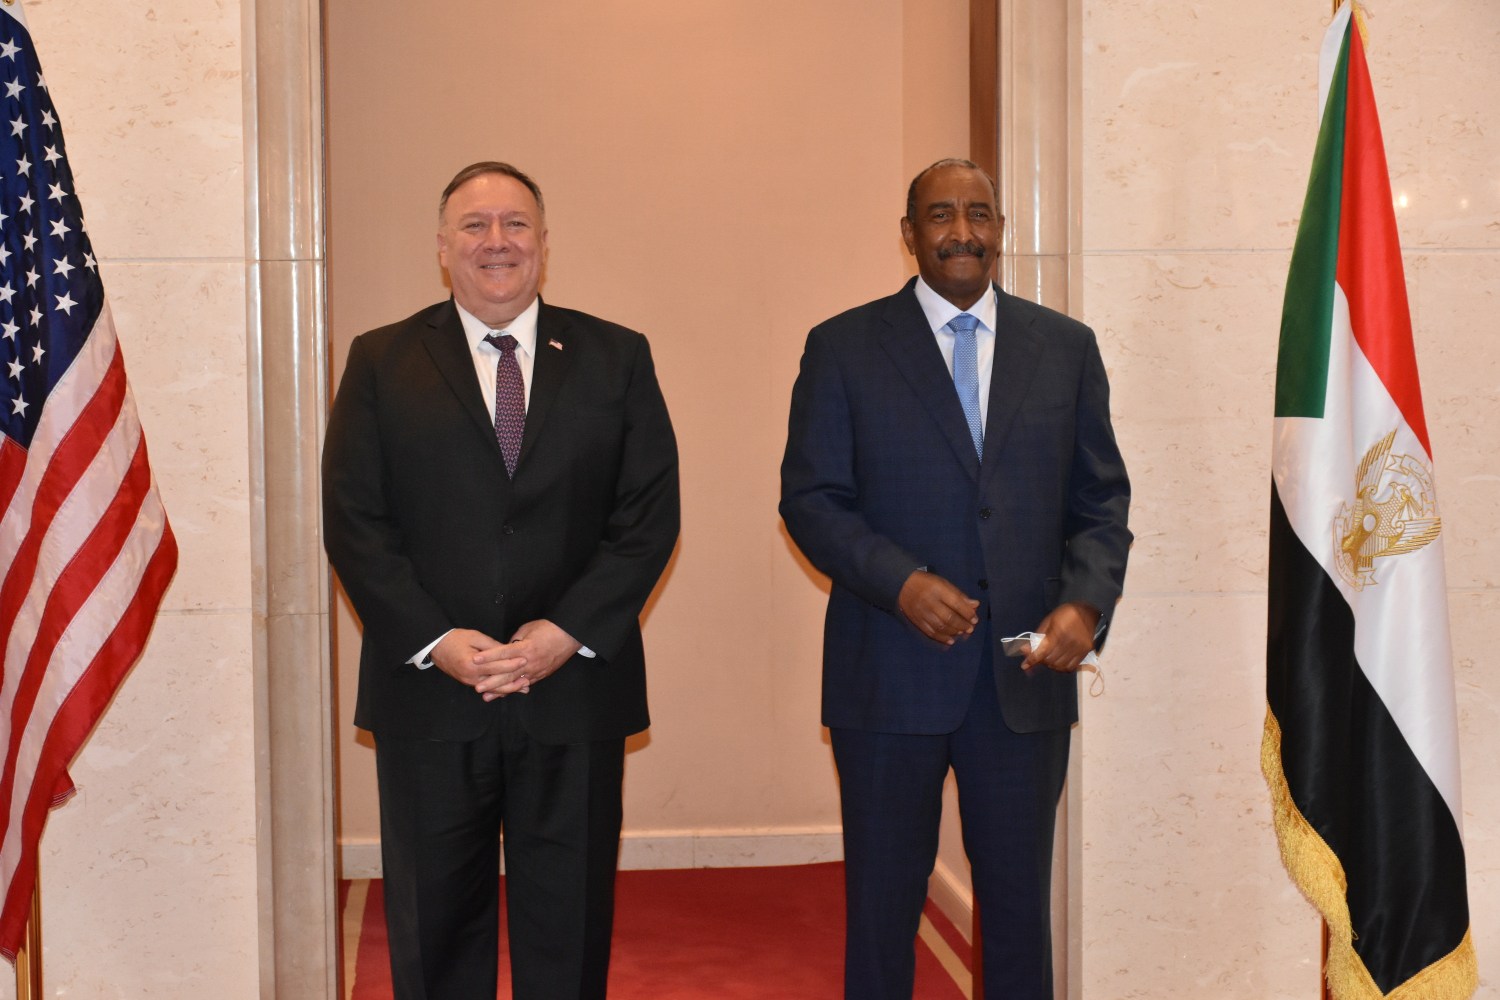 Khartoum, Sudan.- Secretary of State Mike R. Pompeo (left) meets with the Chairman of the Sovereign Council of Sudan, General Abdel Fattah el-Burhan (right), in Khartoum, Sudan, on August 25, 2020. Pompeo arrived this Tuesday ( 25) to Sudan in the first visit by a head of US diplomacy in 15 years, as part of a regional tour to convince other Arab countries to normalize their relations with Israel in the footsteps of the United Arab Emirates. Pompeo, arrived directly from Israel on a first historic flight between the two countries.